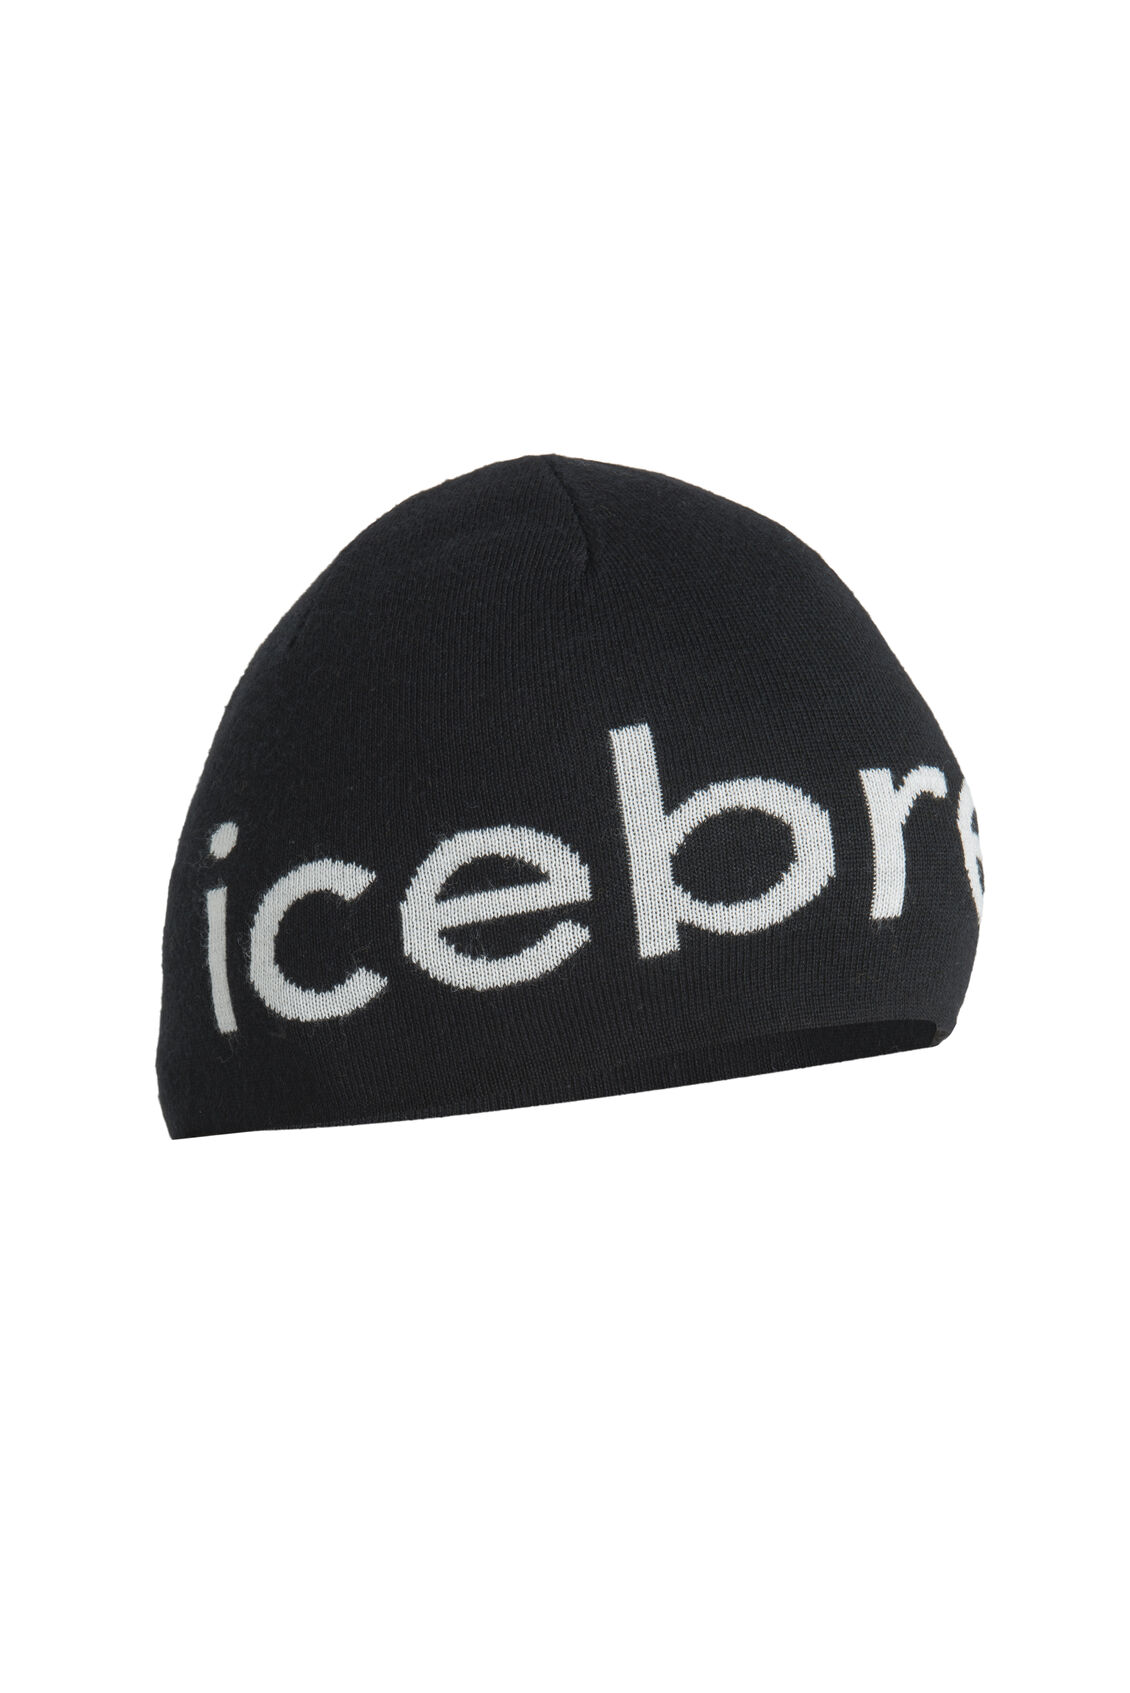 Womens Merino Icebreaker Beanie A go-to everyday beanie made with an ultra-soft blend of natural merino and organic cotton, the Icebreaker Beanie features a double-layer construction for added warmth.